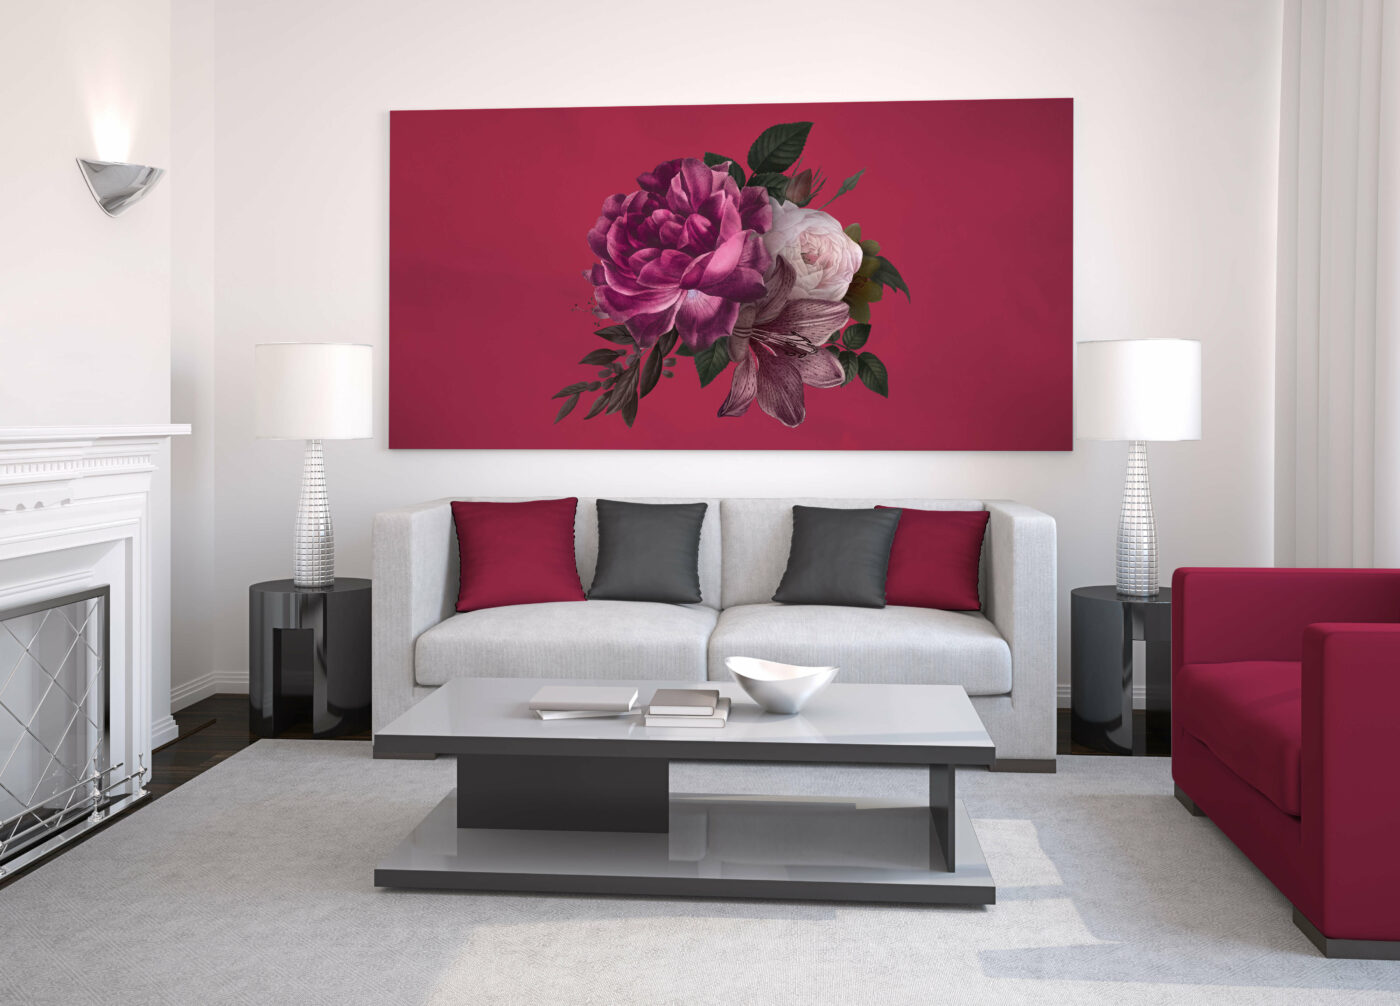 Bringing Pantone's 2023 Colour of the Year, Viva Magenta, into a room through decor items including cushions and art.